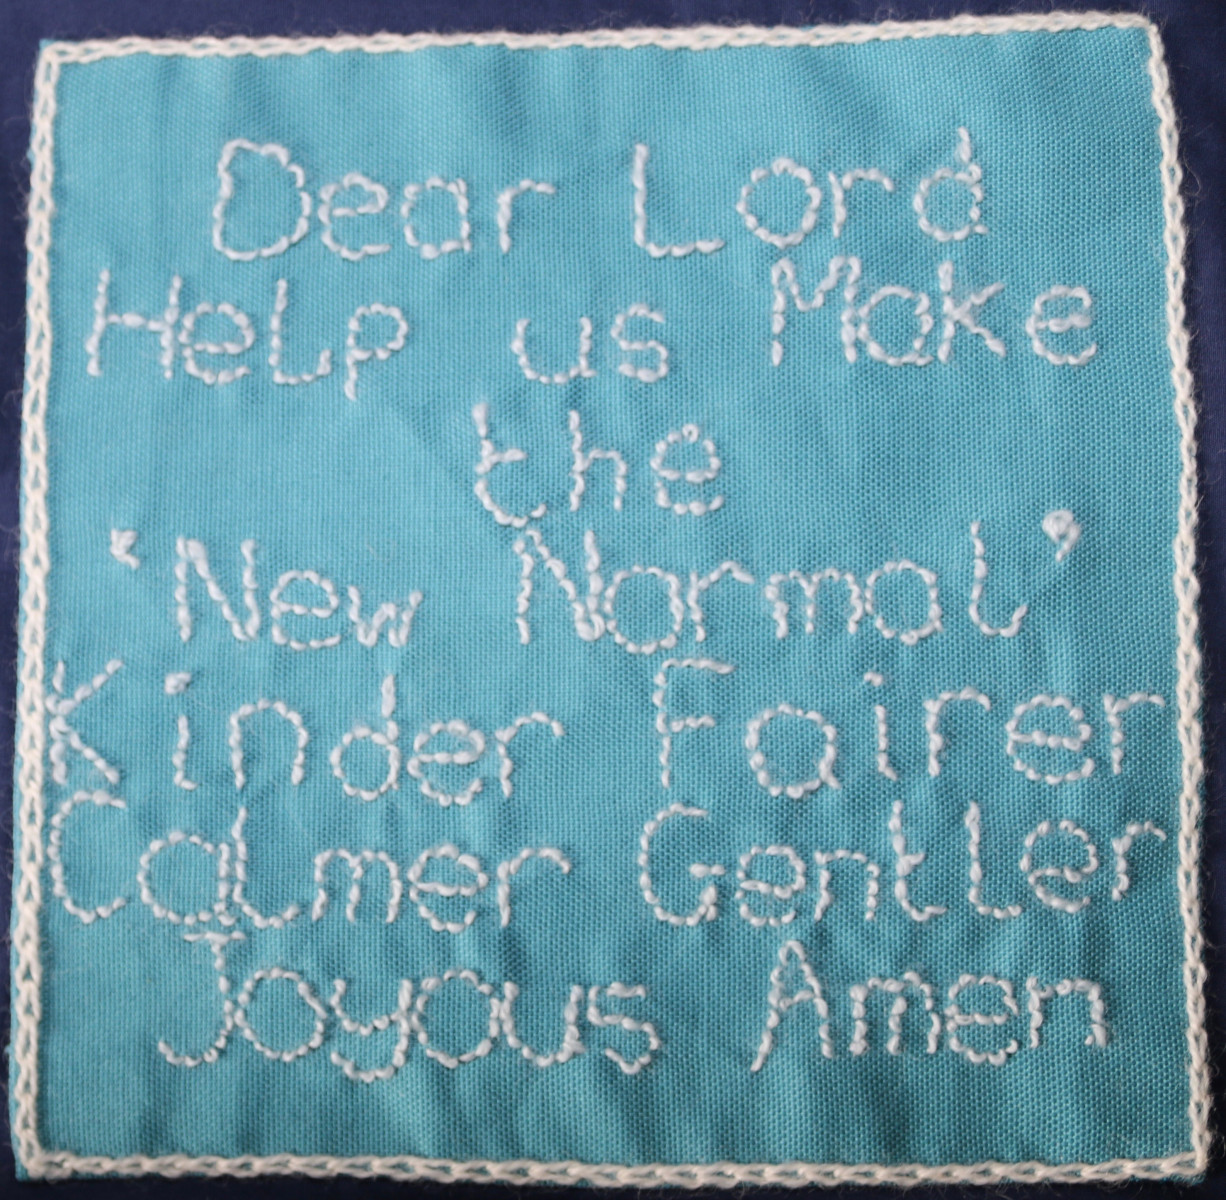 Embroidered words saying: Dear Lord, Help us make the New Normal kinder fairer calmer gentler joyous Amen